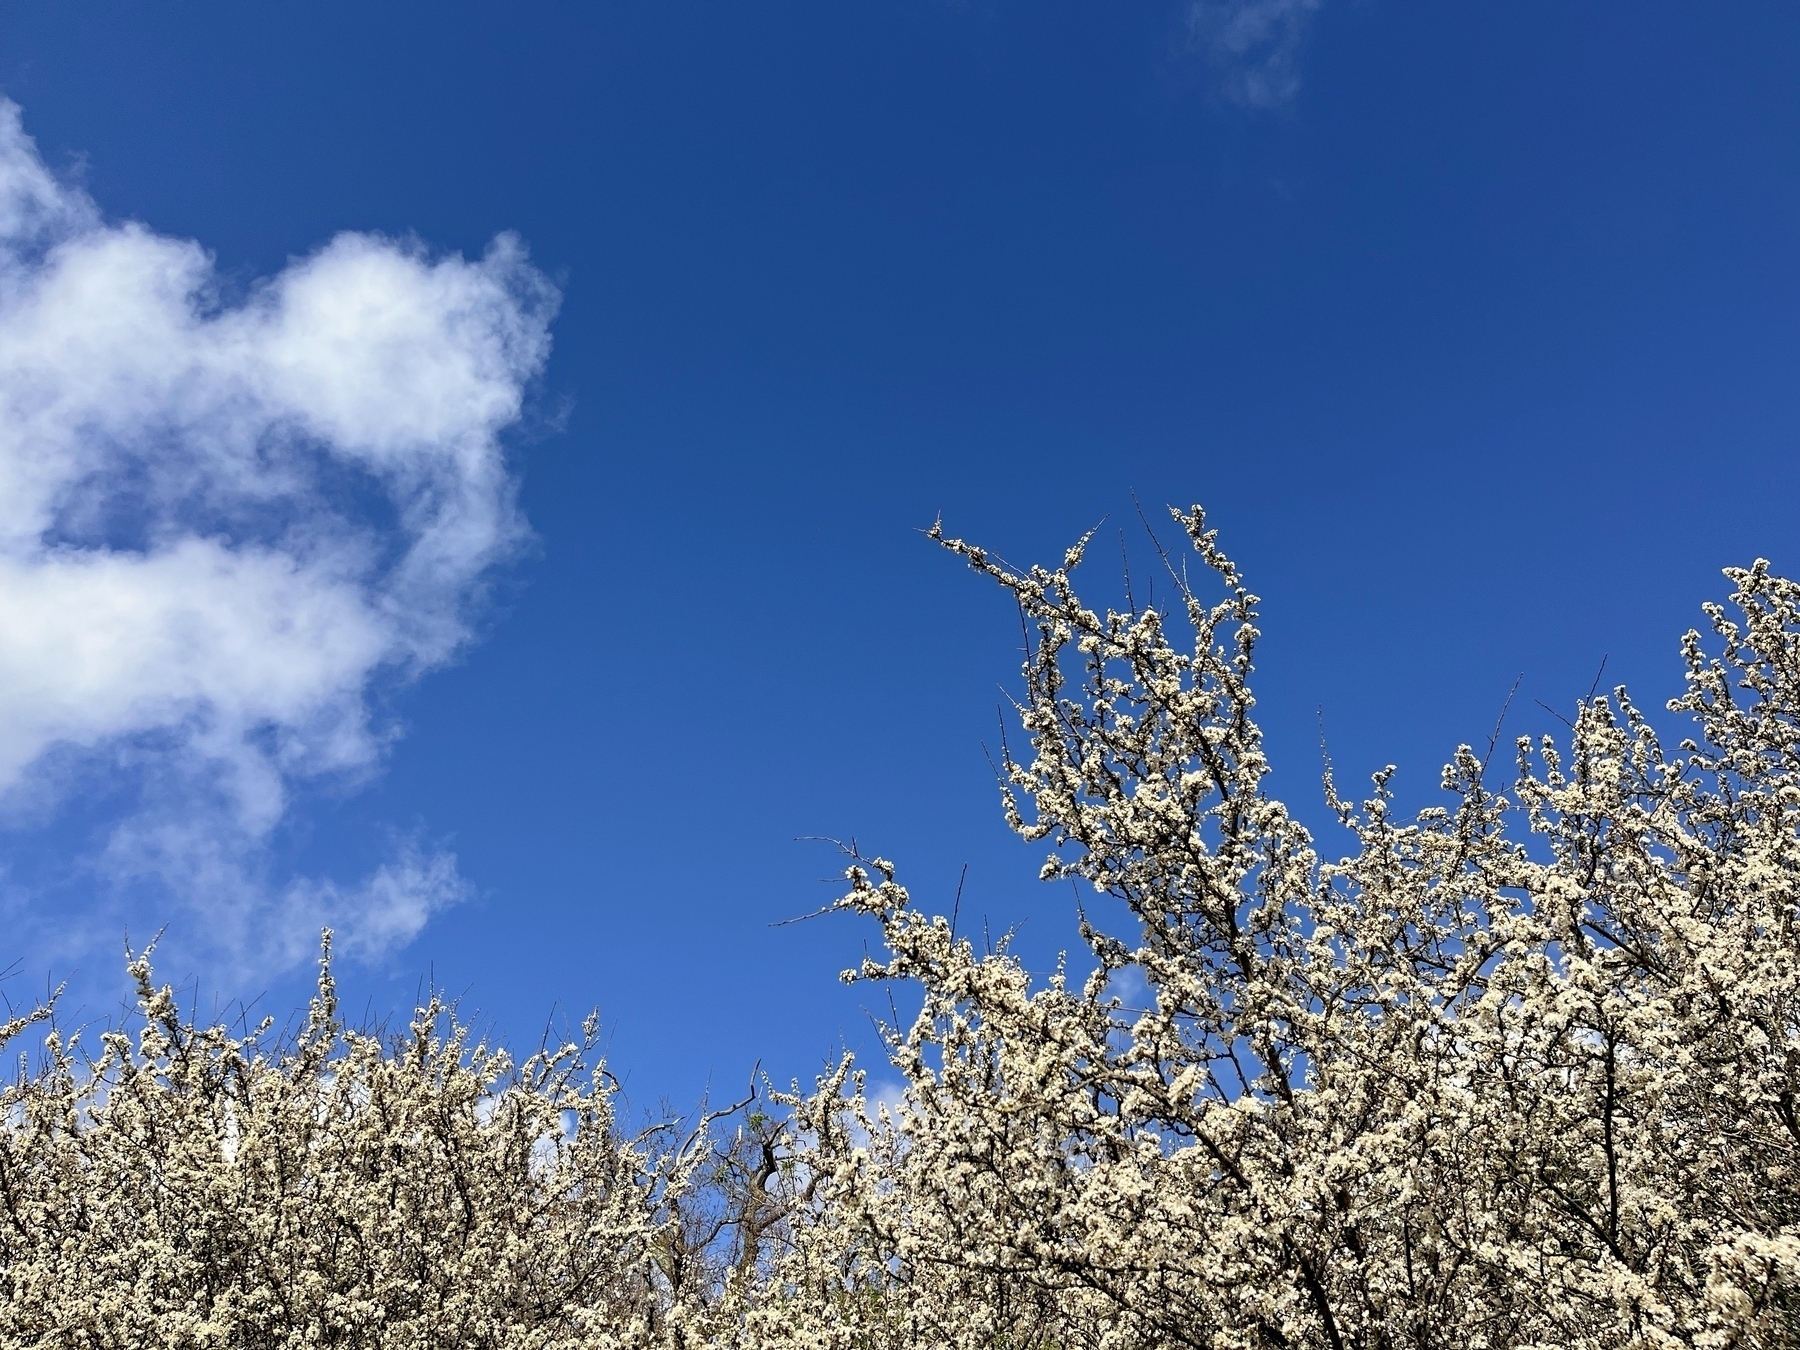 A mass of small white blossom on a spiky blackthorn bush against a deep blue sky and fluffy white clouds.